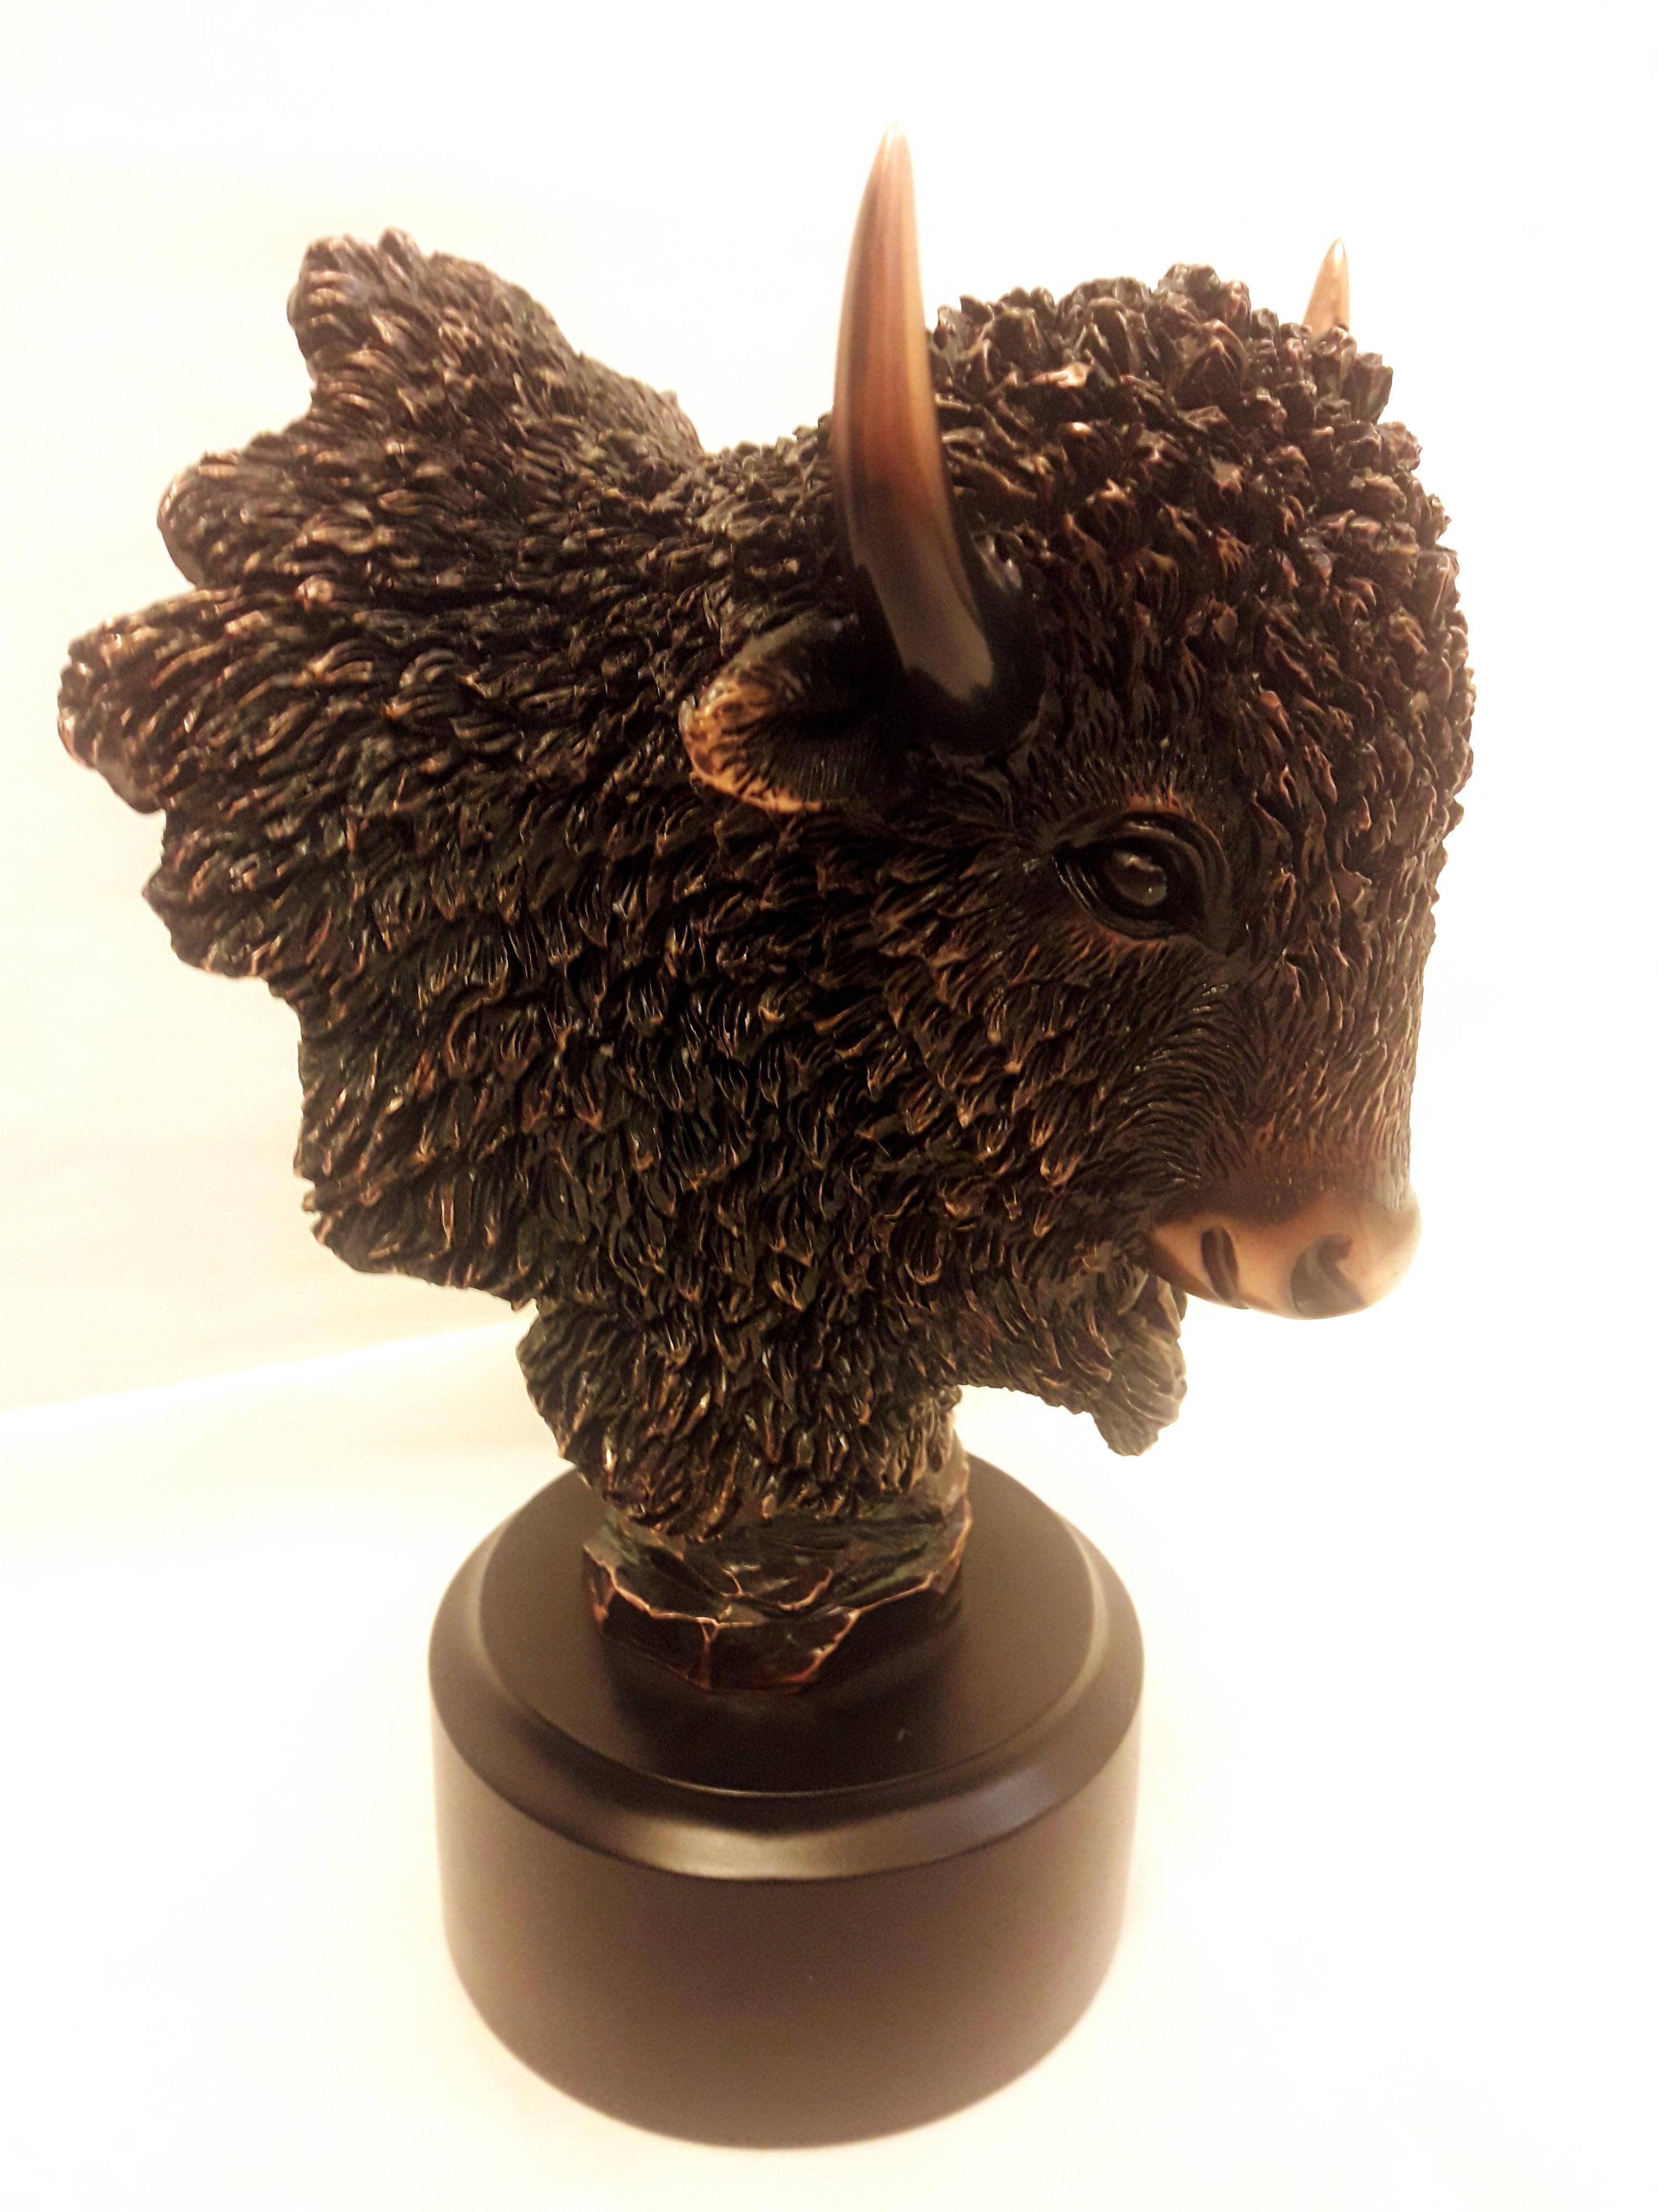 Late 20th Century Vitange Bison Head Sculpture Copper Plated For Sale